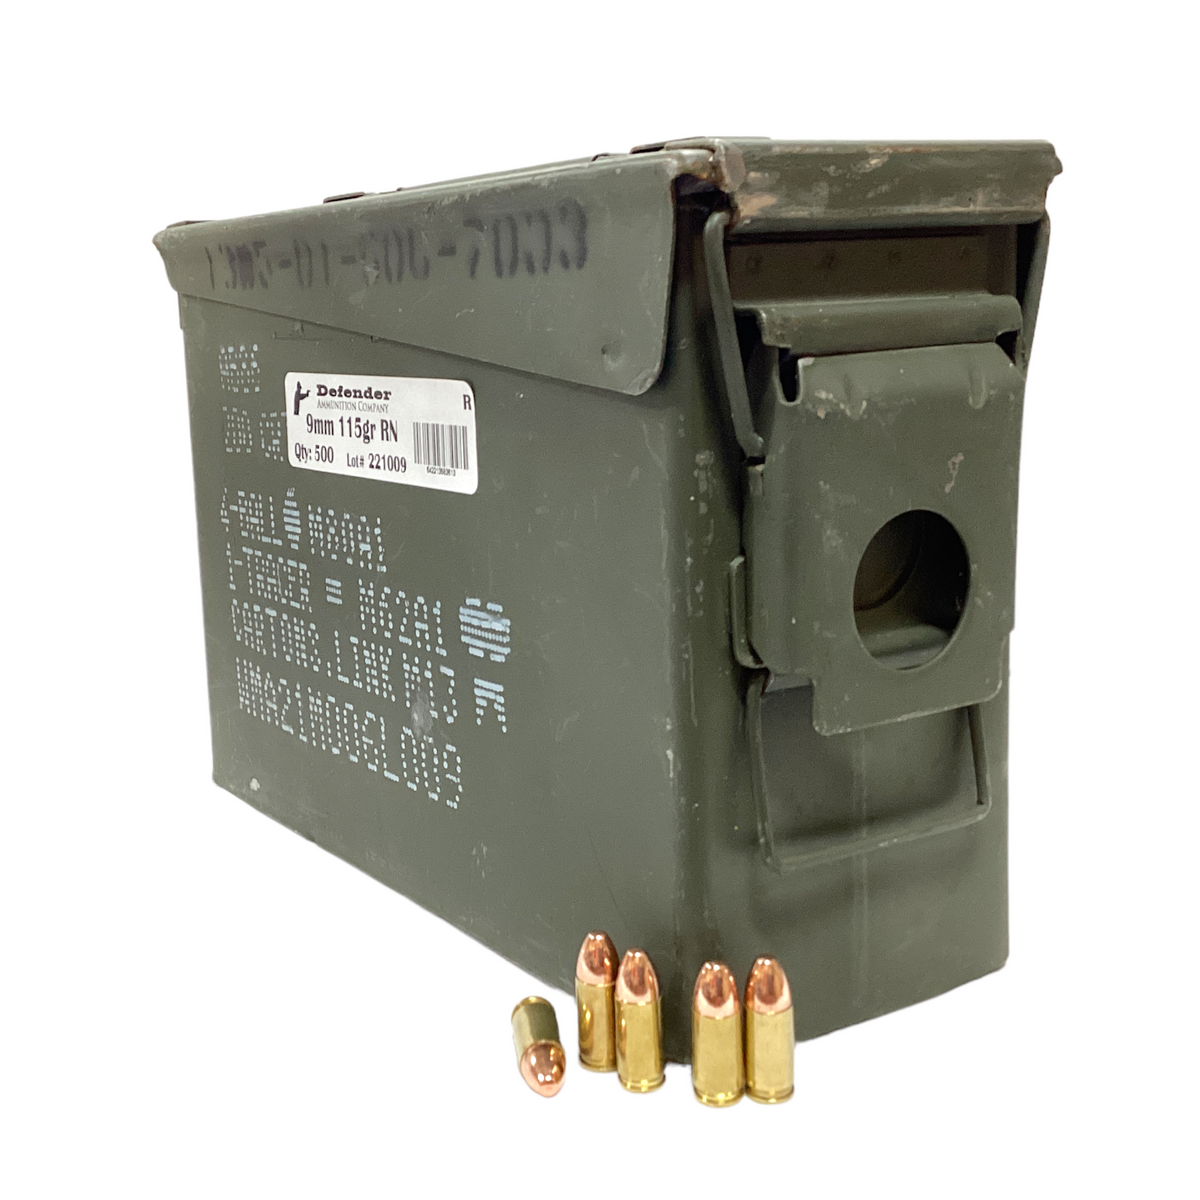 30 Cal Ammo Can, 9mm Ammo Can